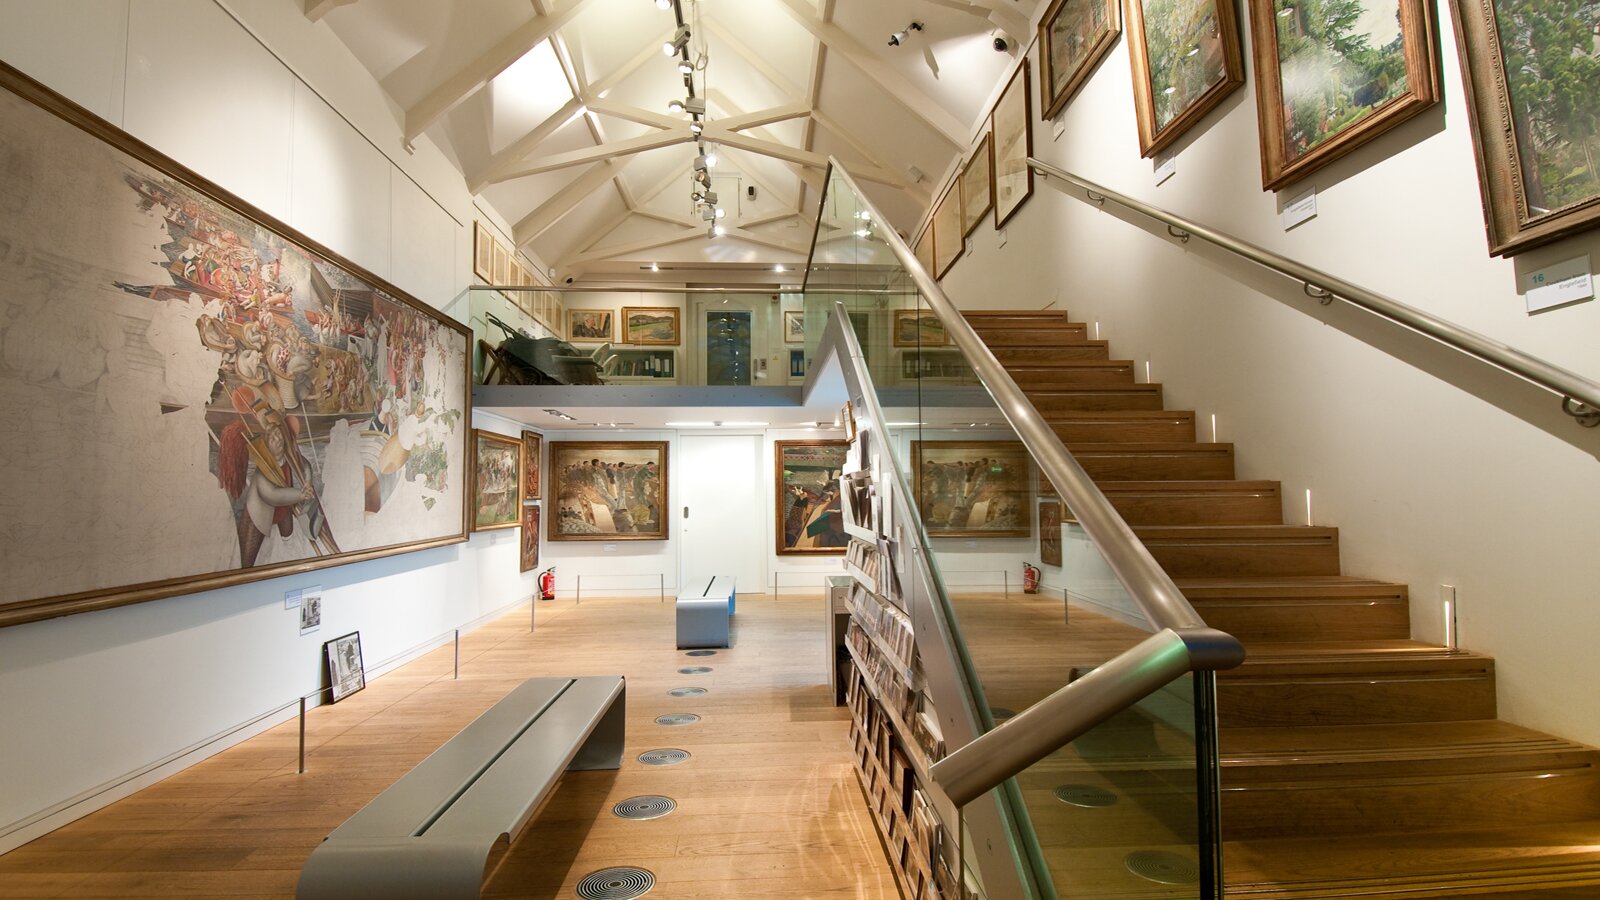 The interior of The Stanley Spencer Gallery.